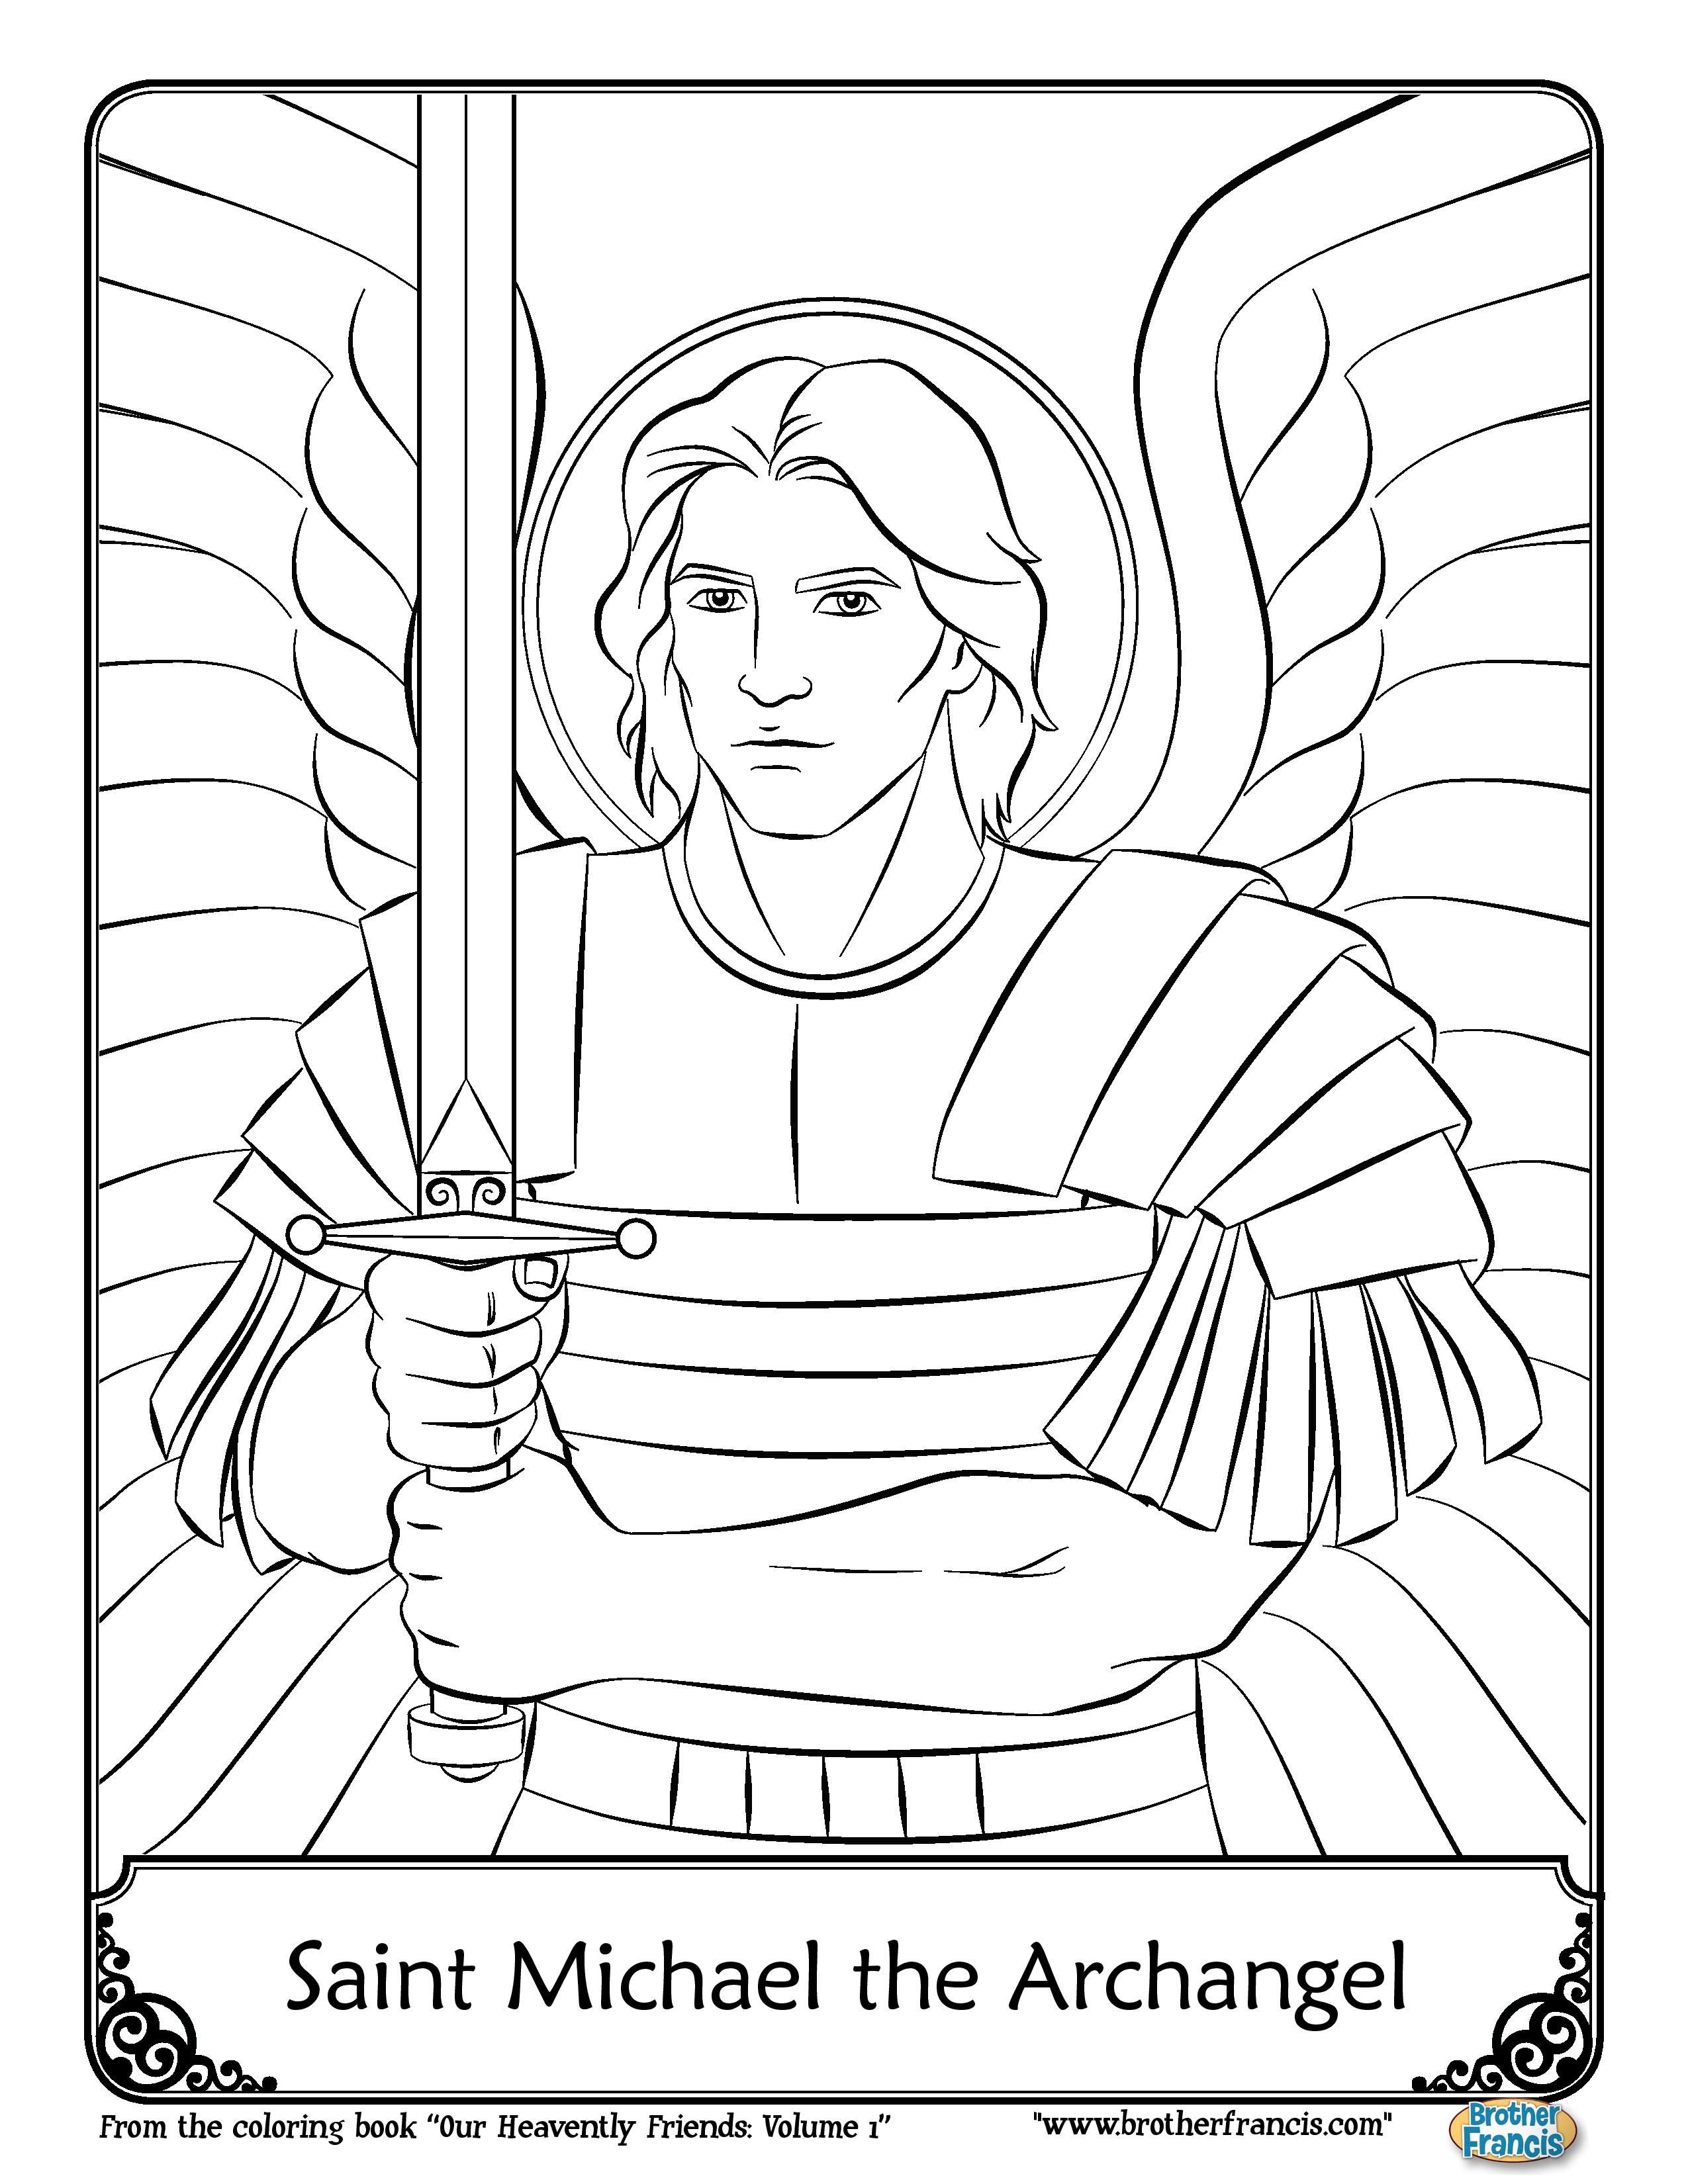 September 29_saint-michael-the-archangel-coloring-page-brother-francis-page-001